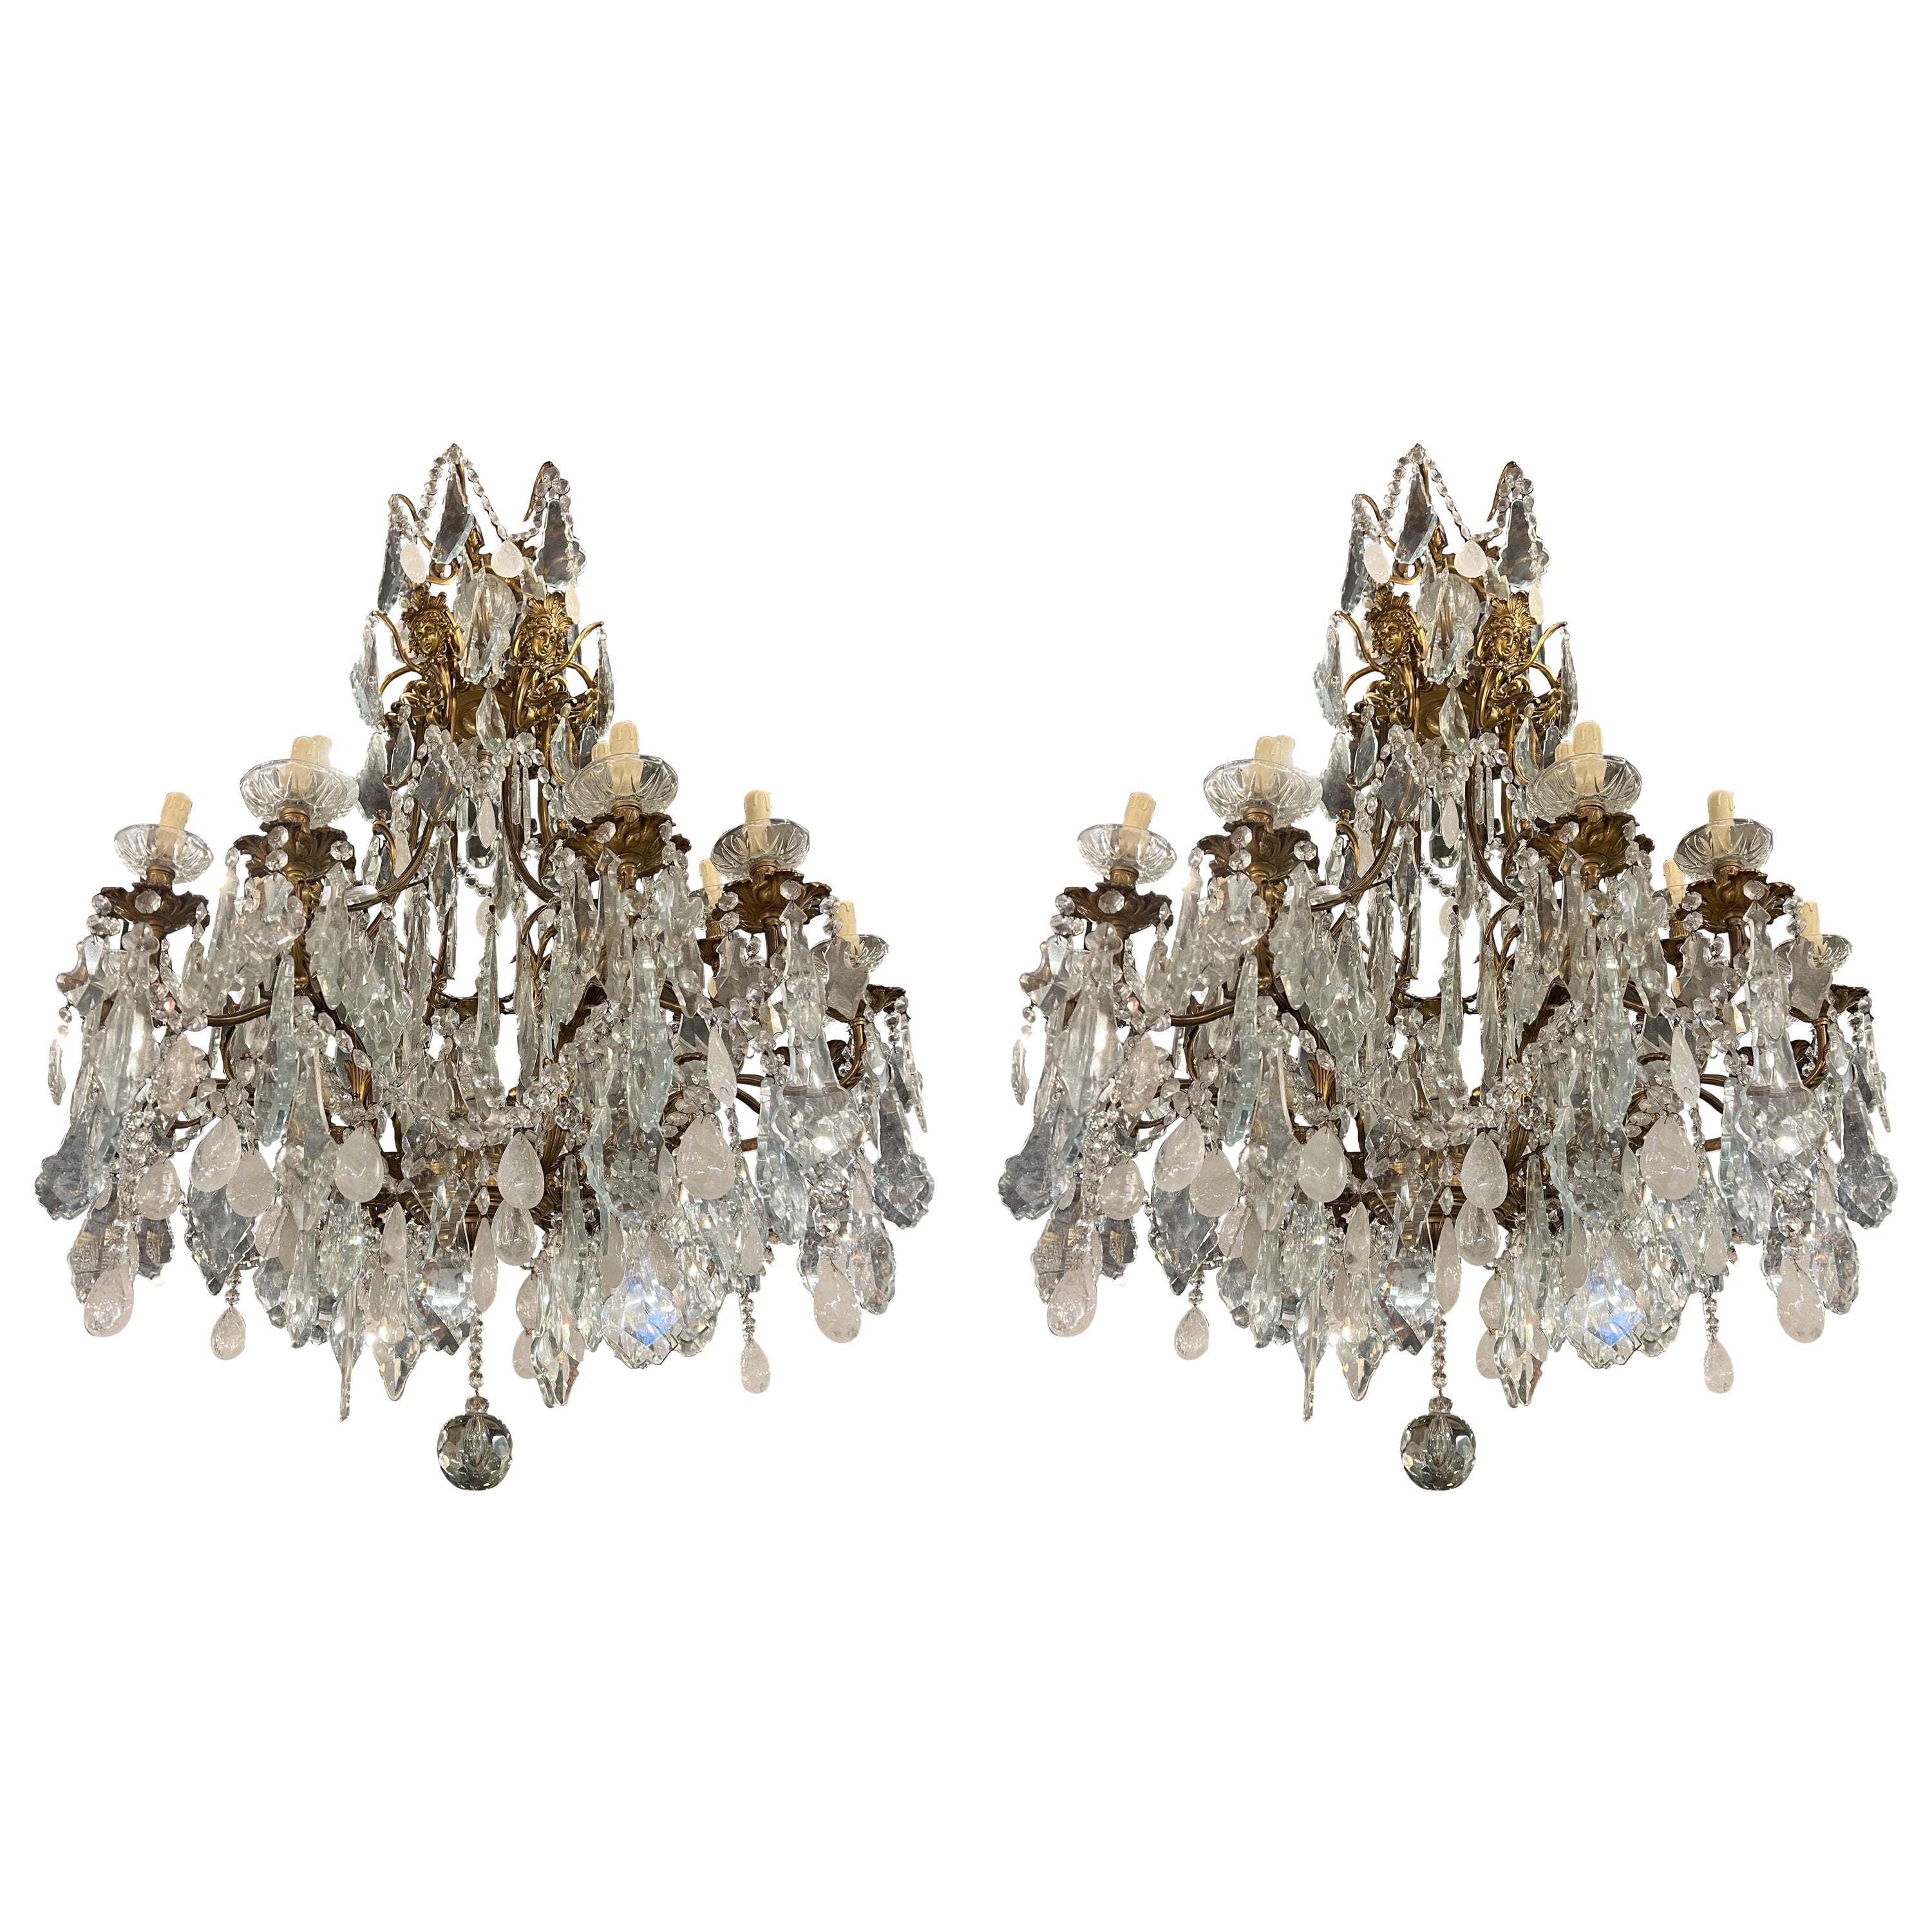 Stunning, 19thC, bronze and rock crystal, 5ft tall French chandelier (pair)
 For Sale